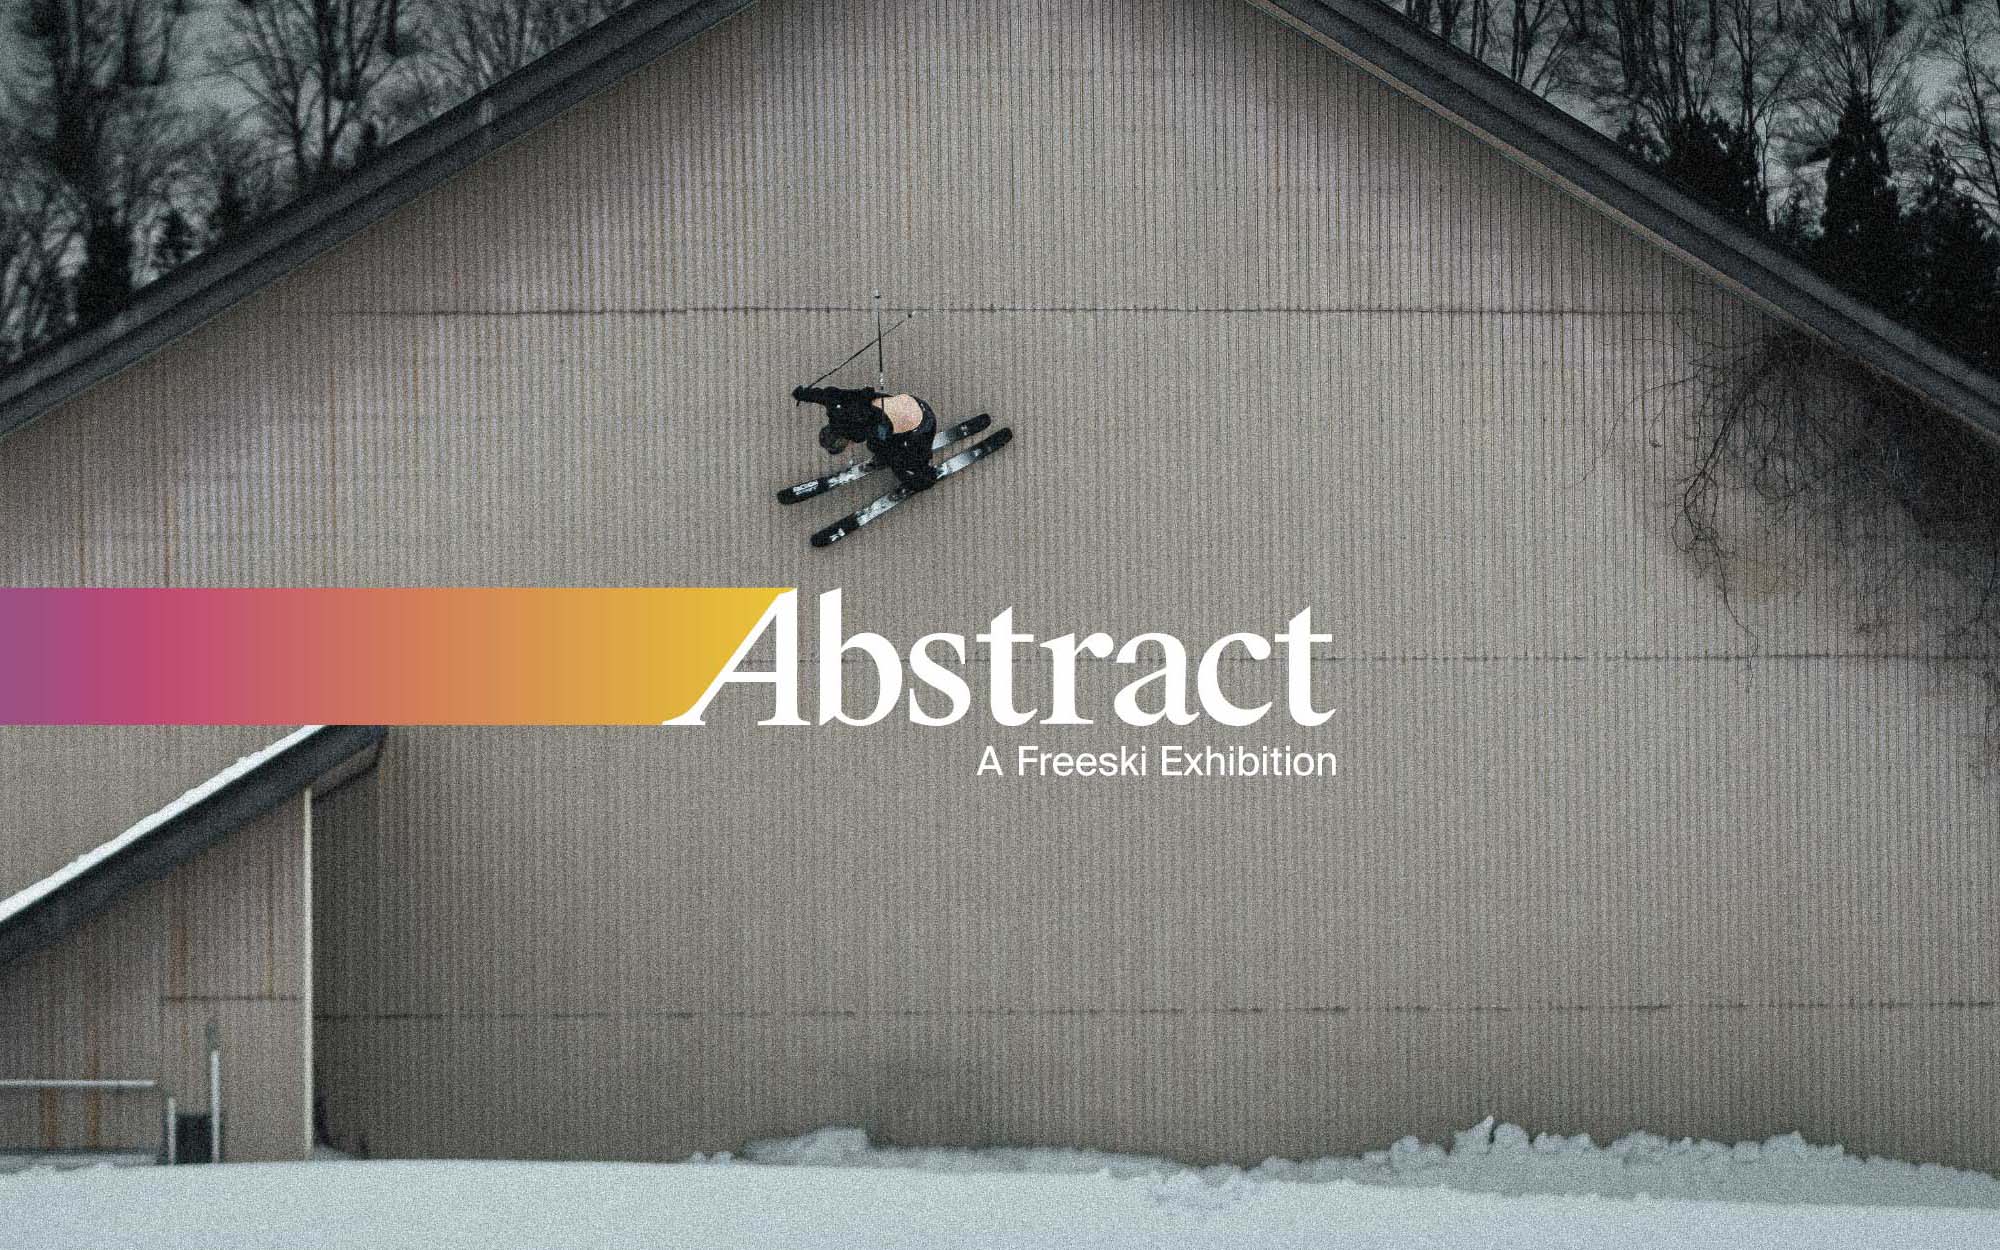 Abstract: A Freeski Exhibition